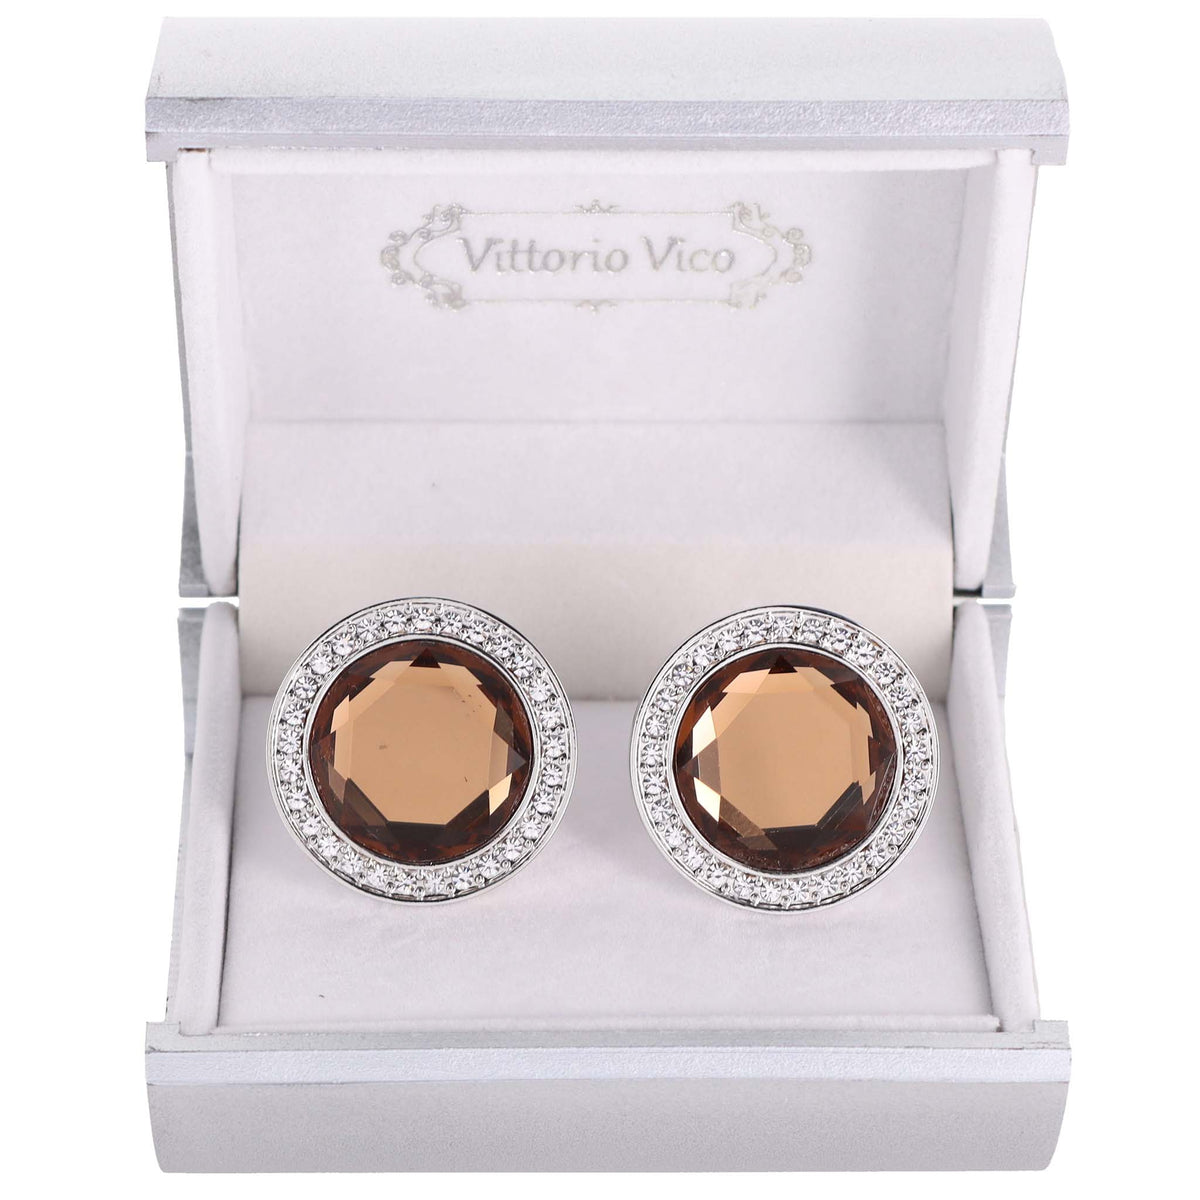 Vittorio Vico Discus Colored Crystal Bling Cufflinks (CL11XX Series)